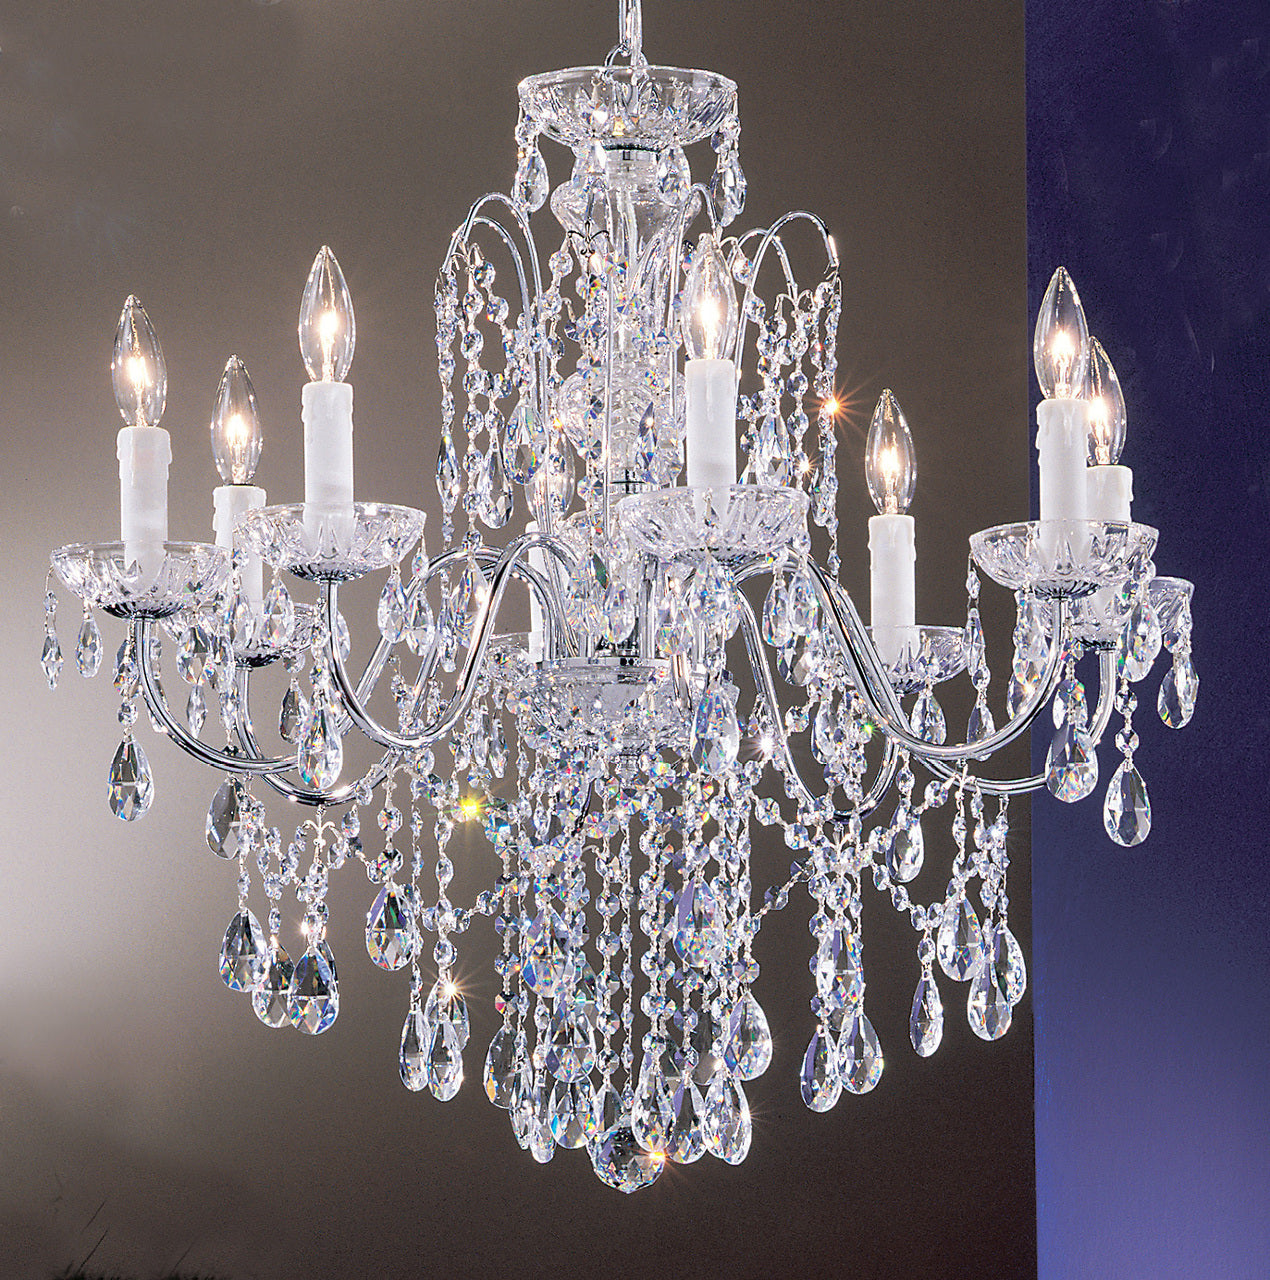 Classic Lighting 8398 CH S Daniele Crystal Chandelier in Chrome